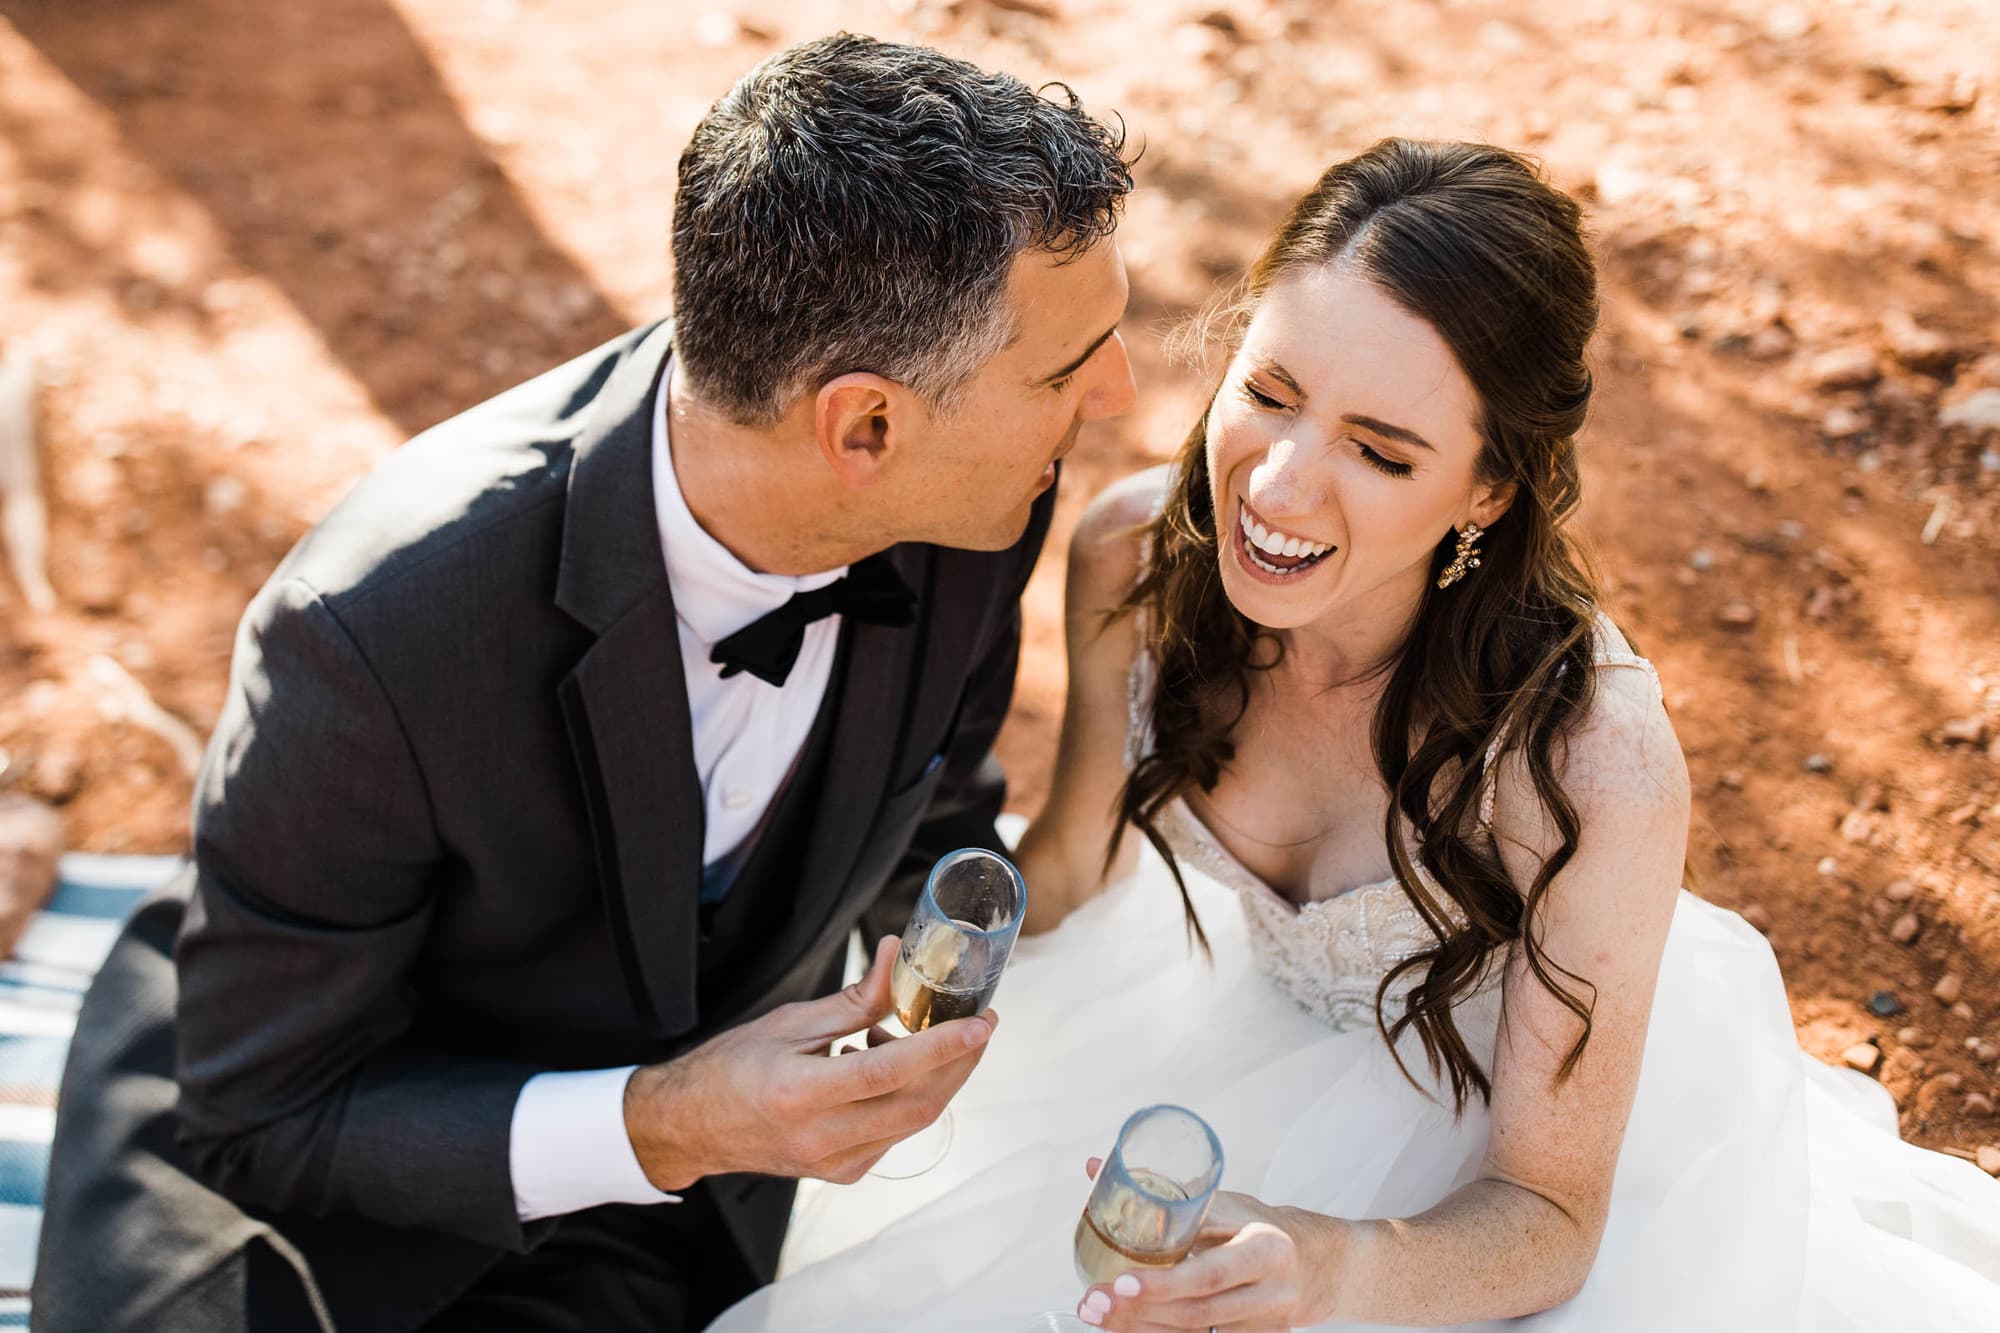  If you want to elope in Sedona, this Sedona elopement planning guide is for you. I share all the info you need to plan an epic day.